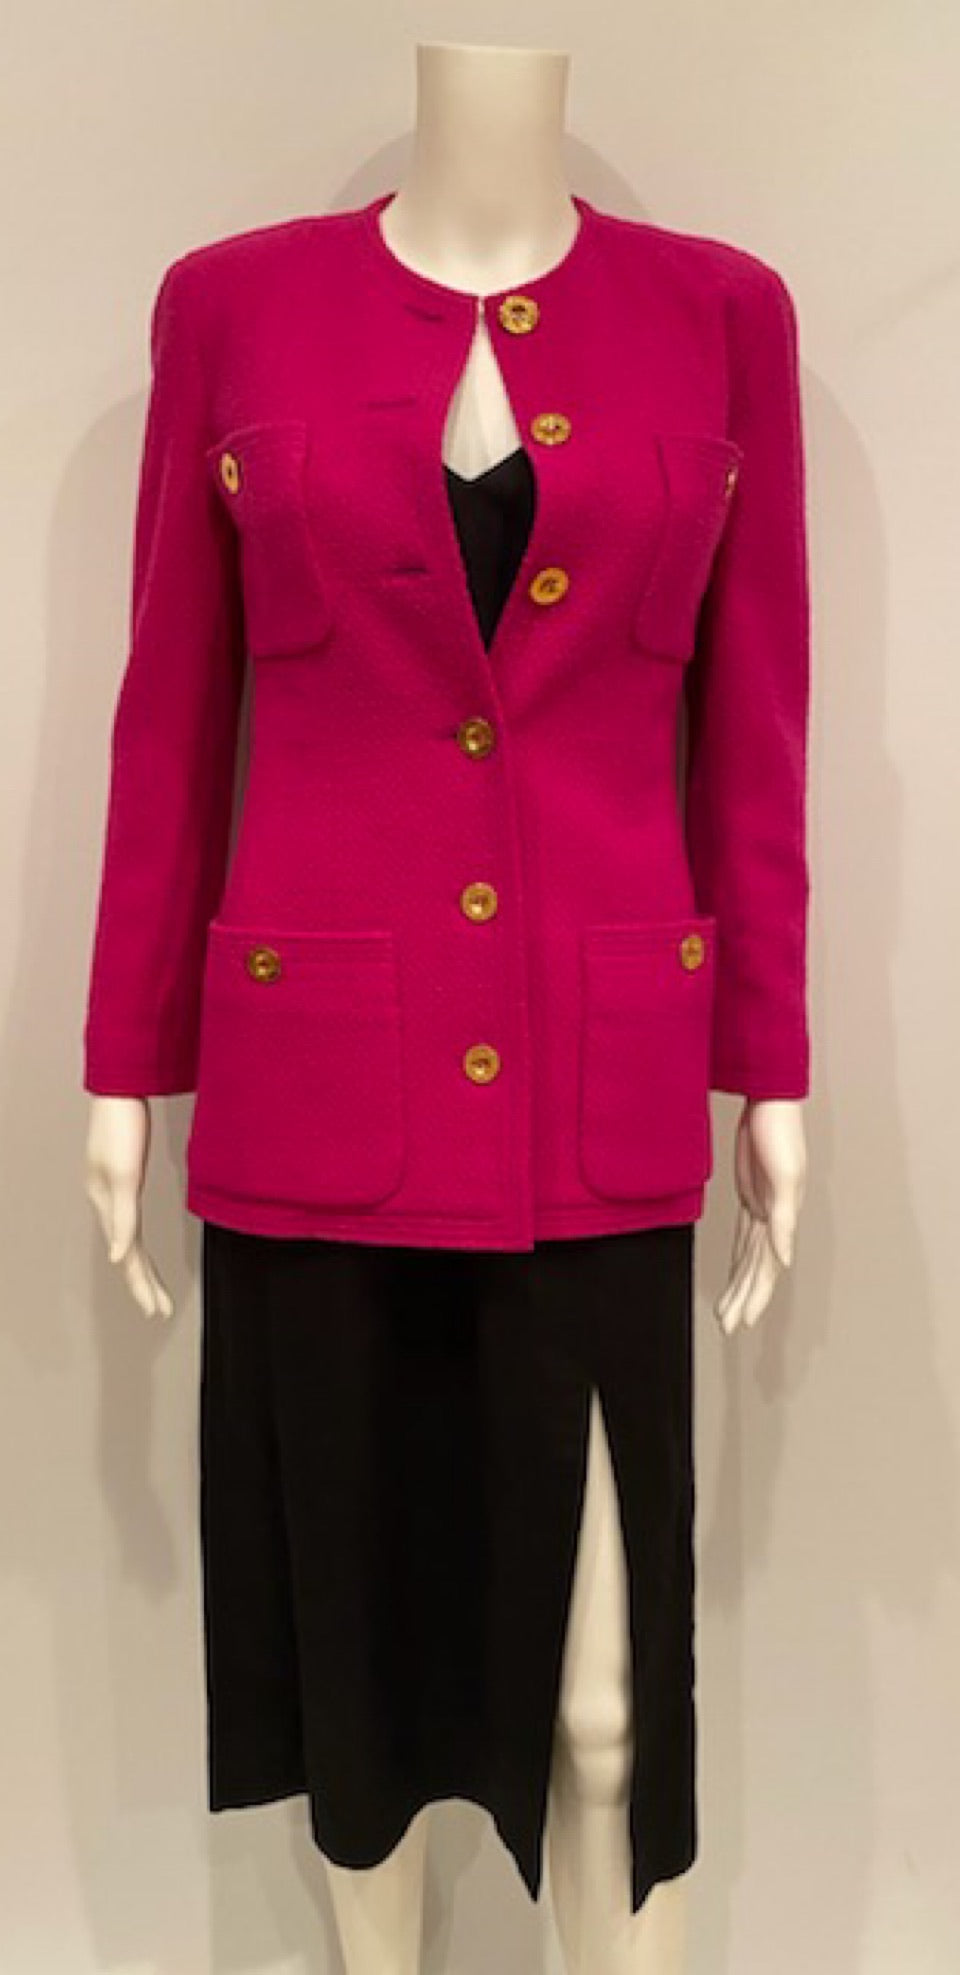 Chanel Vintage Boucle Jacket And Skirt Suit, $3,557, farfetch.com